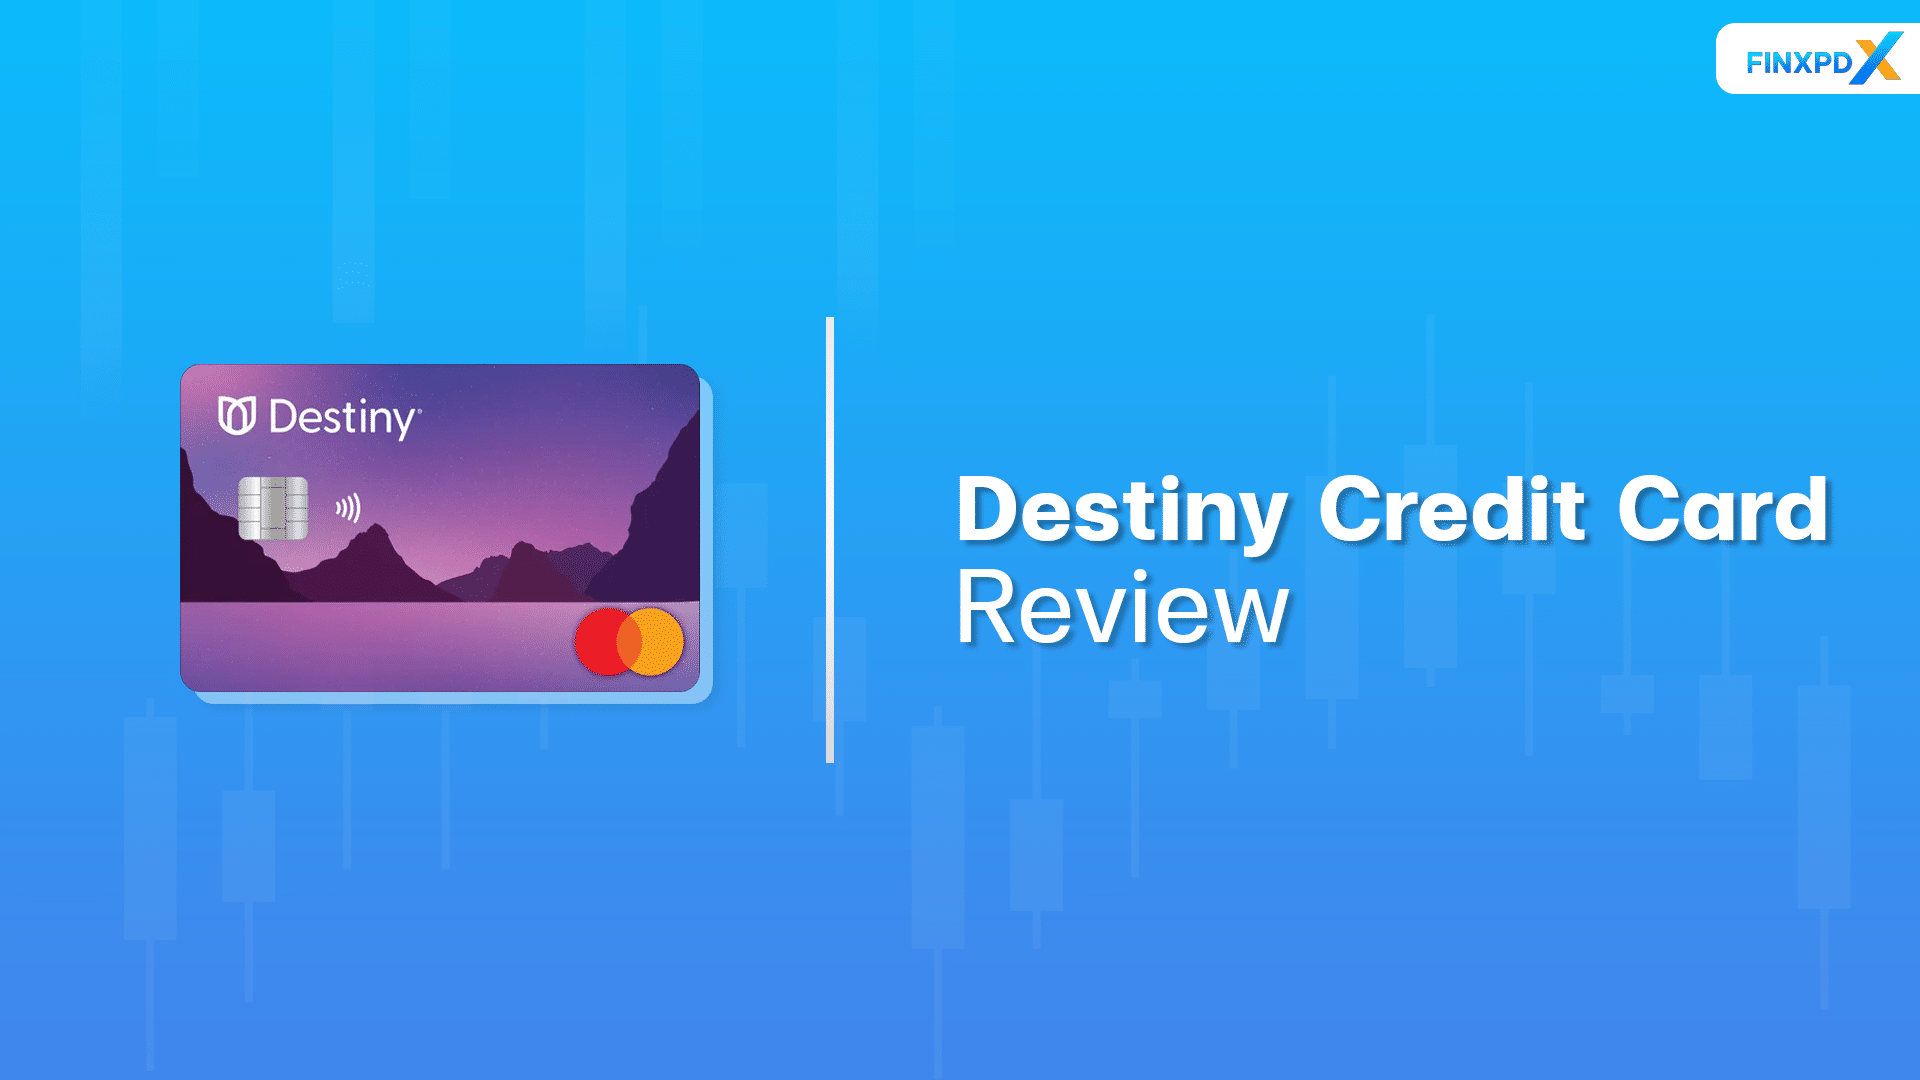 Destiny Credit Card Review: The Key to Better Credit